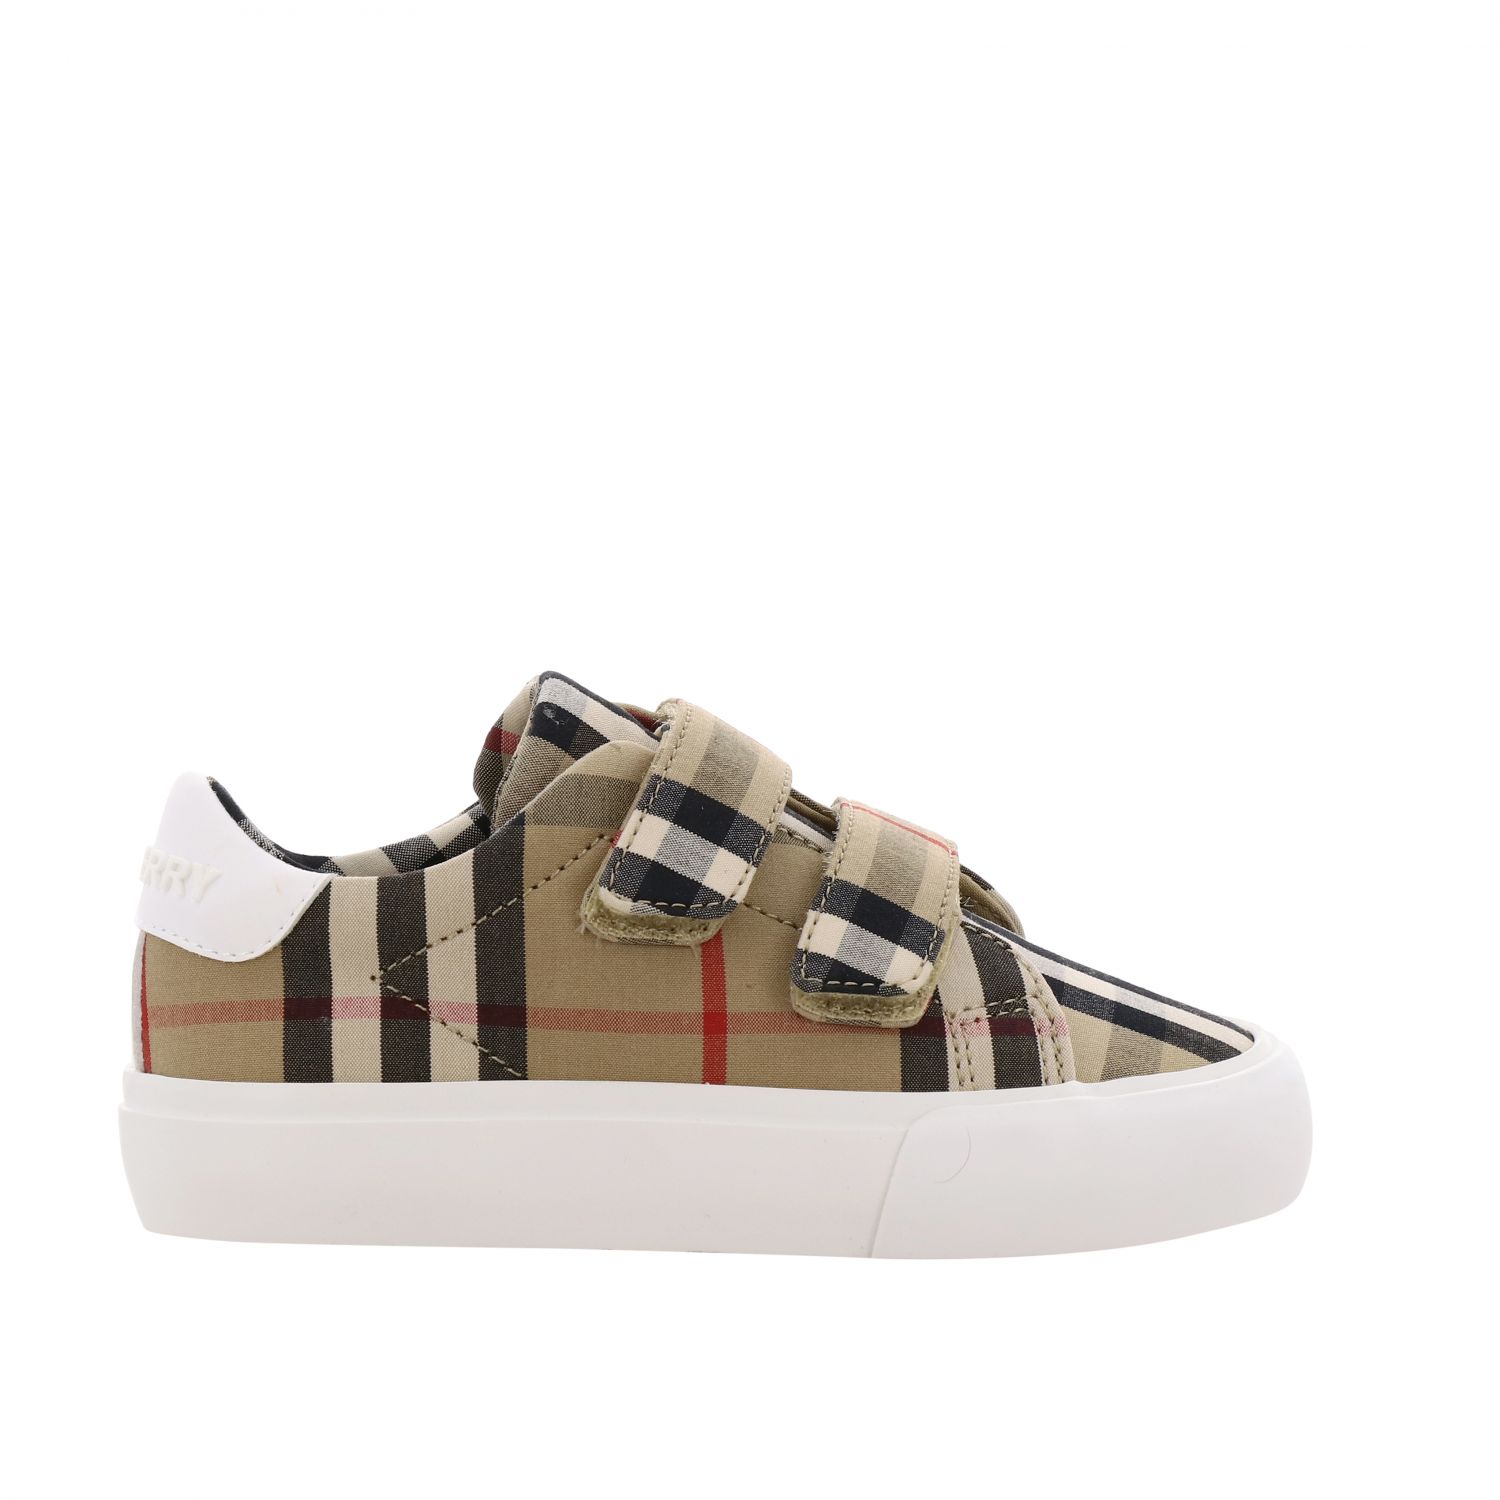 Burberry sneakers in check canvas and leather with logo | Shoes ...